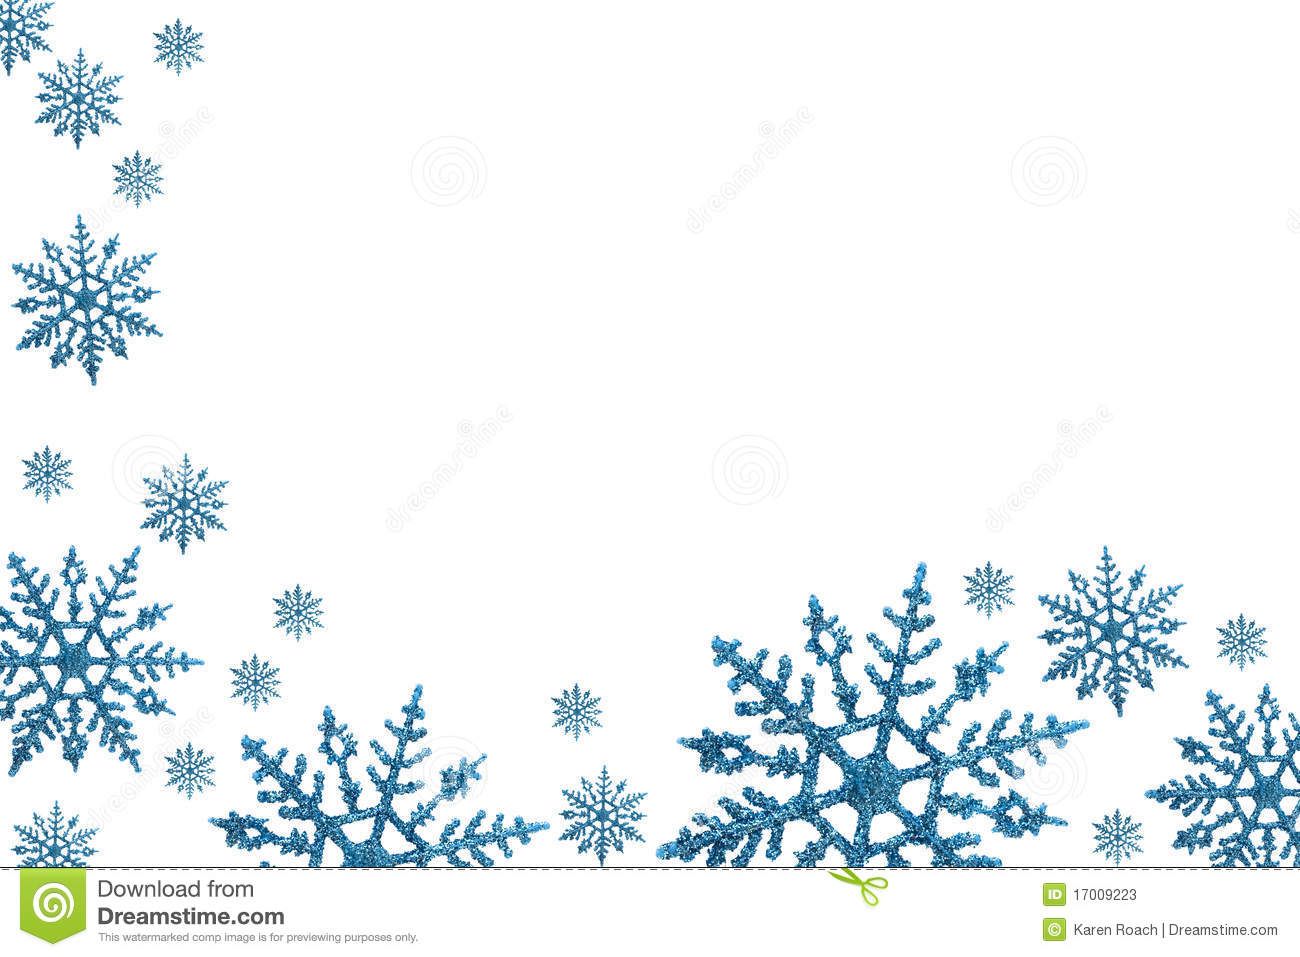 Snow borders clipart 2 » Clipart Station.